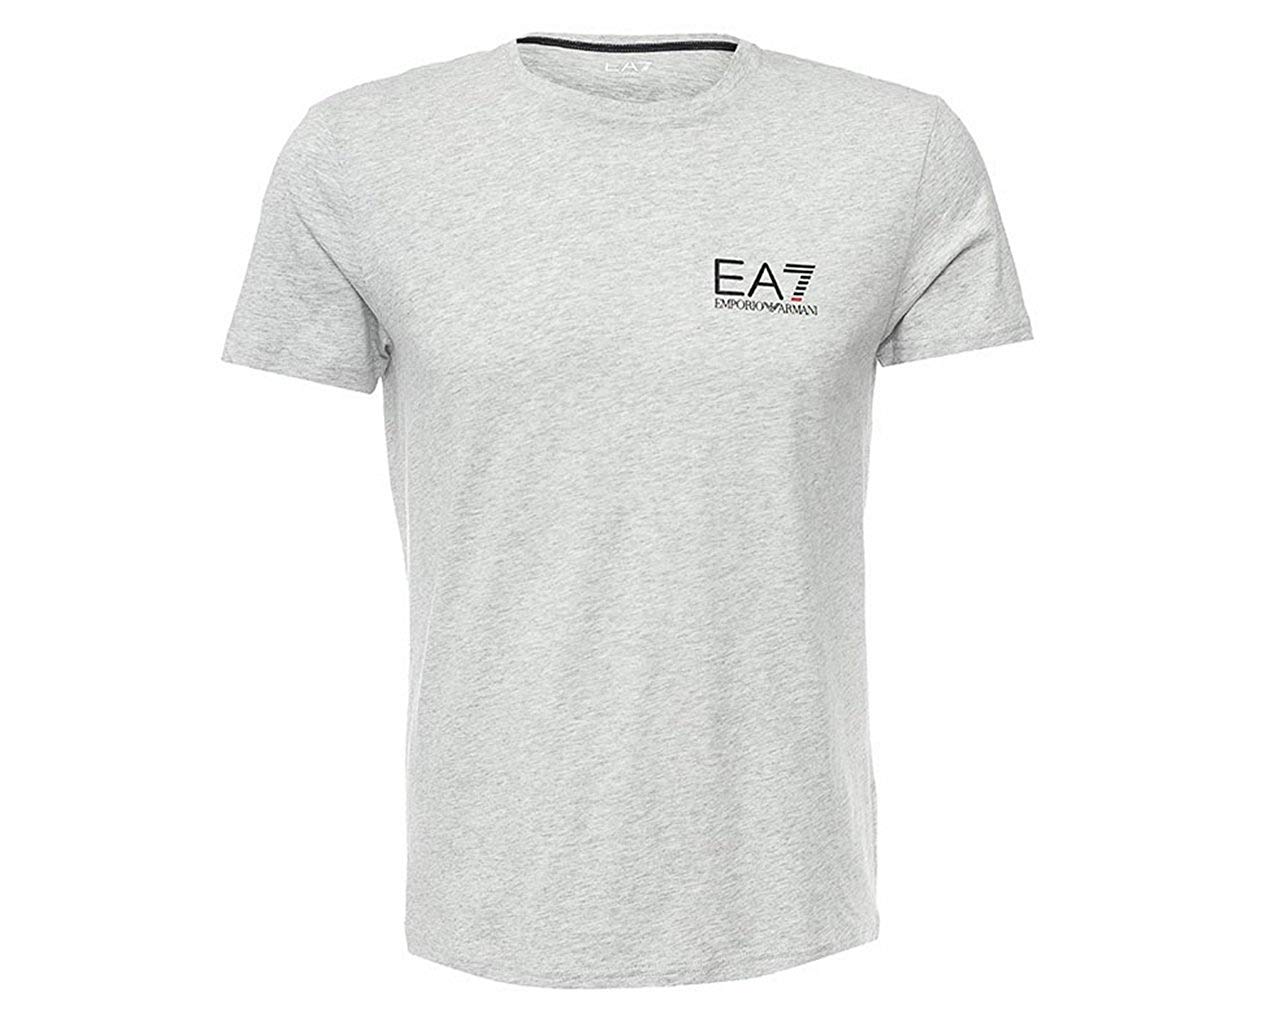 Emporio Armani Mens Ea7 Mens T-shirt In White - Active Shirt , HD Wallpaper & Backgrounds